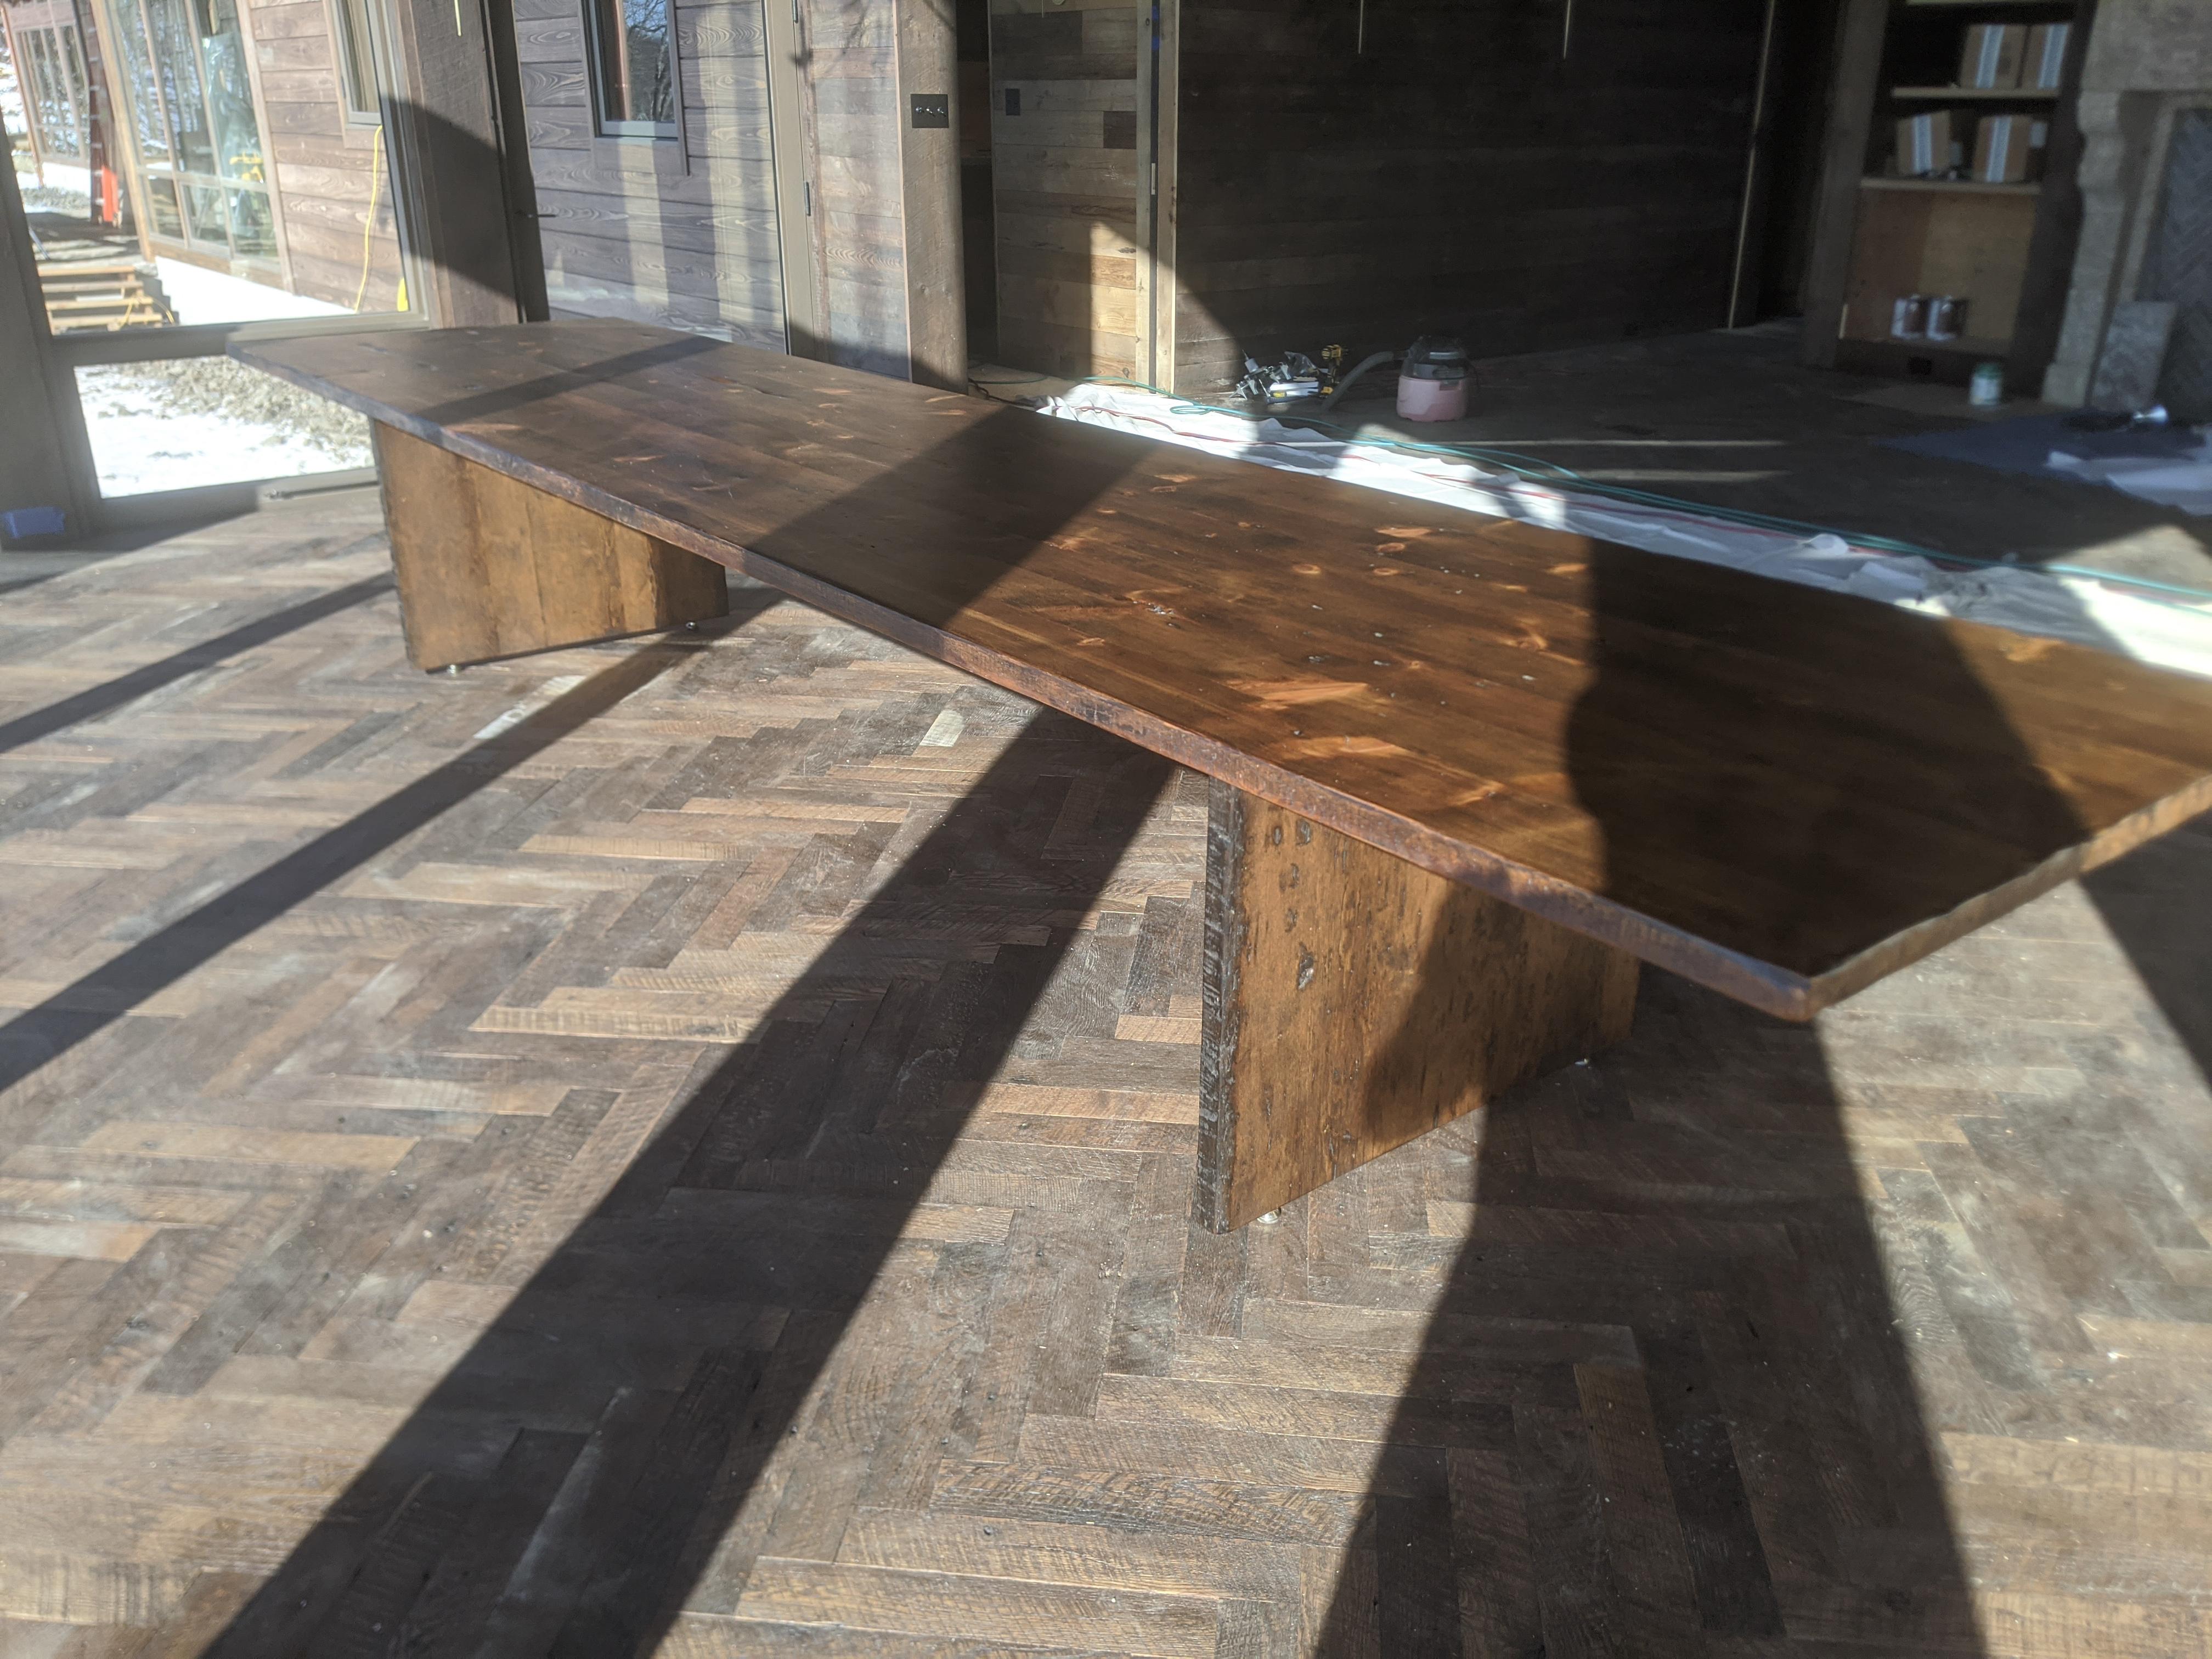 This pedestal dinining or library table utilizes reclaimed lumber from the barns of Pennsylvania's Mennonite community, harvested and re-purposed. The lumber was cut by hand from Old Growth forests in the 16th century. It was specifically cut for